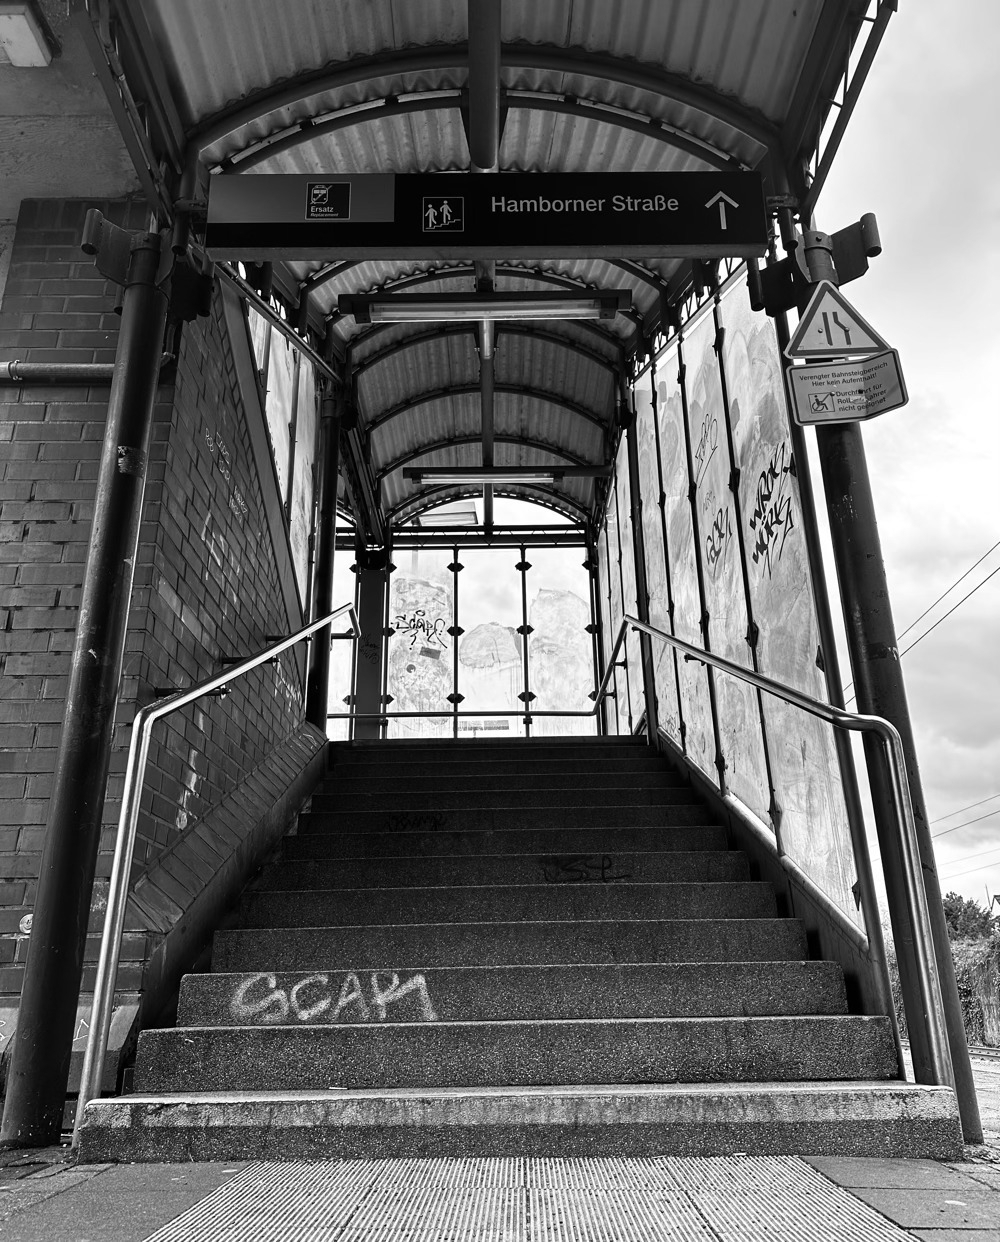 Black and white photo of a stone stair well, going up, at a train station.